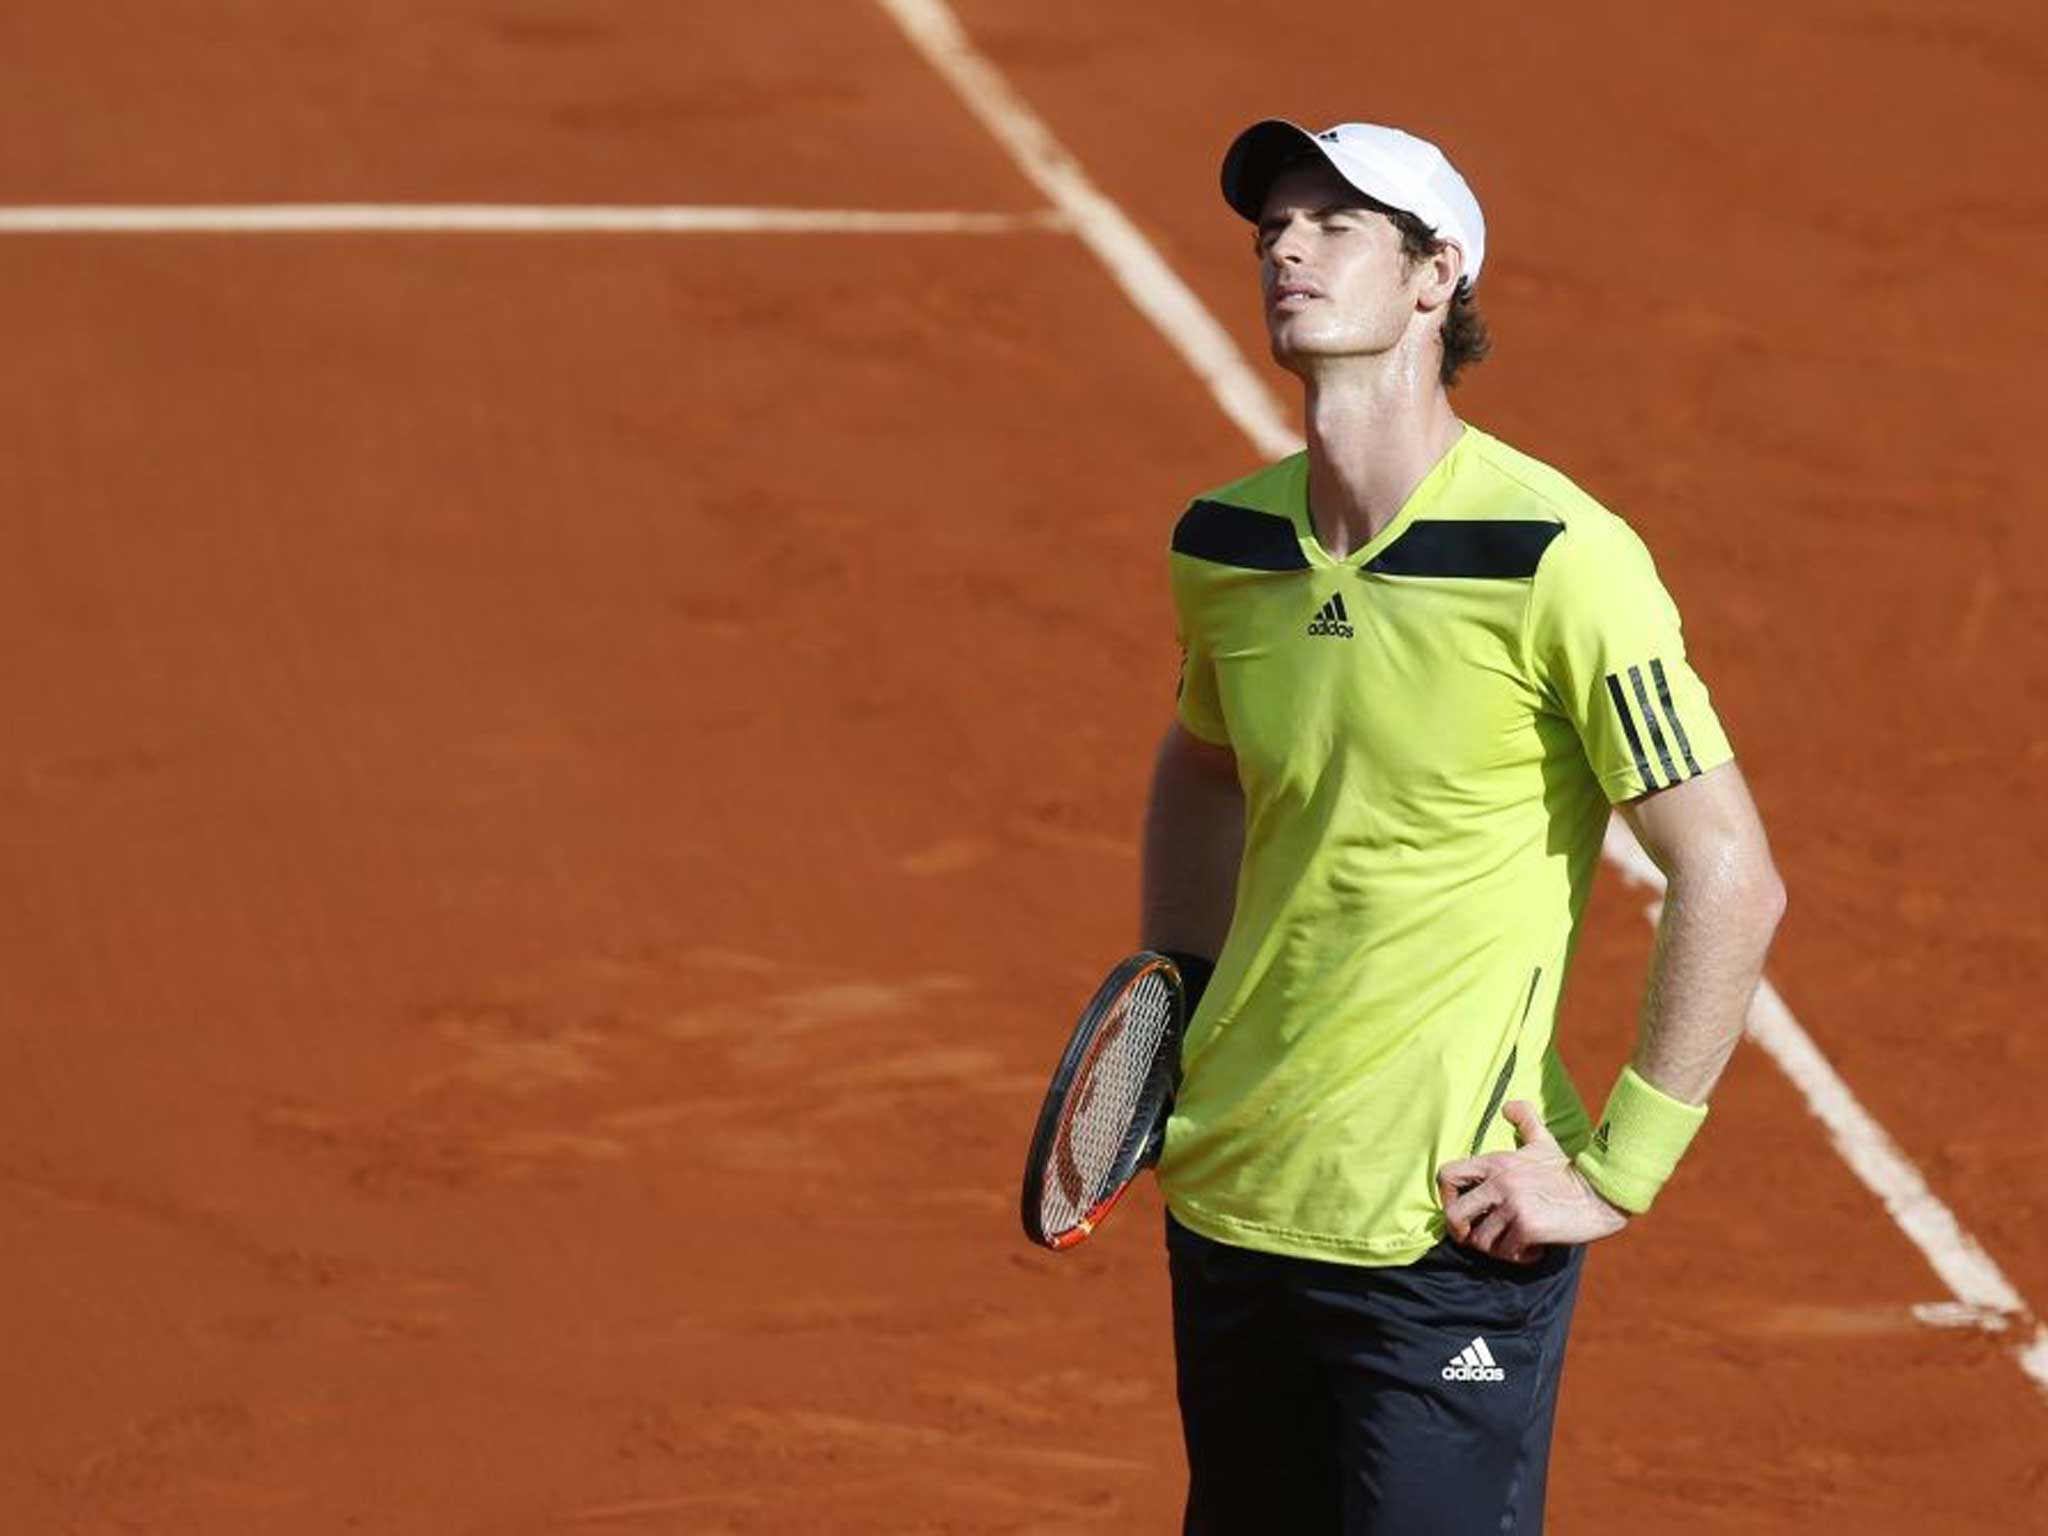 Murray will set about retaining his crown at this week’s Aegon Championships at Queen’s Club